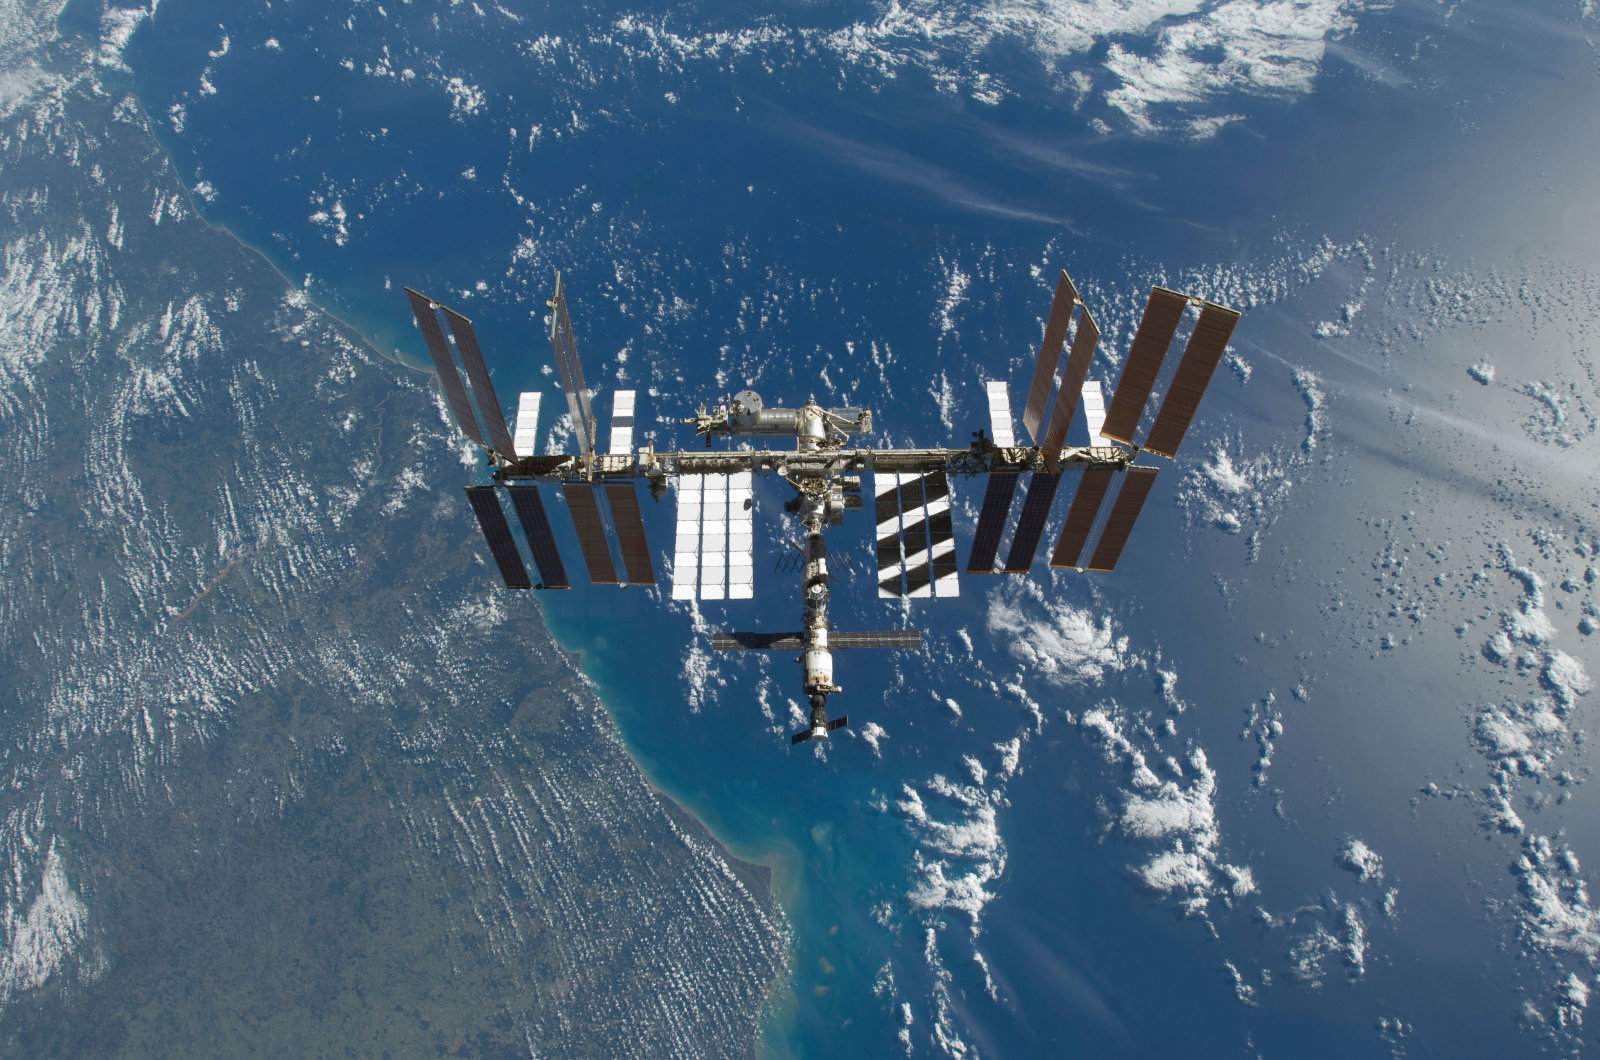 BH6TDA November 25, 2009 - The International Space Station in orbit above the Earth.